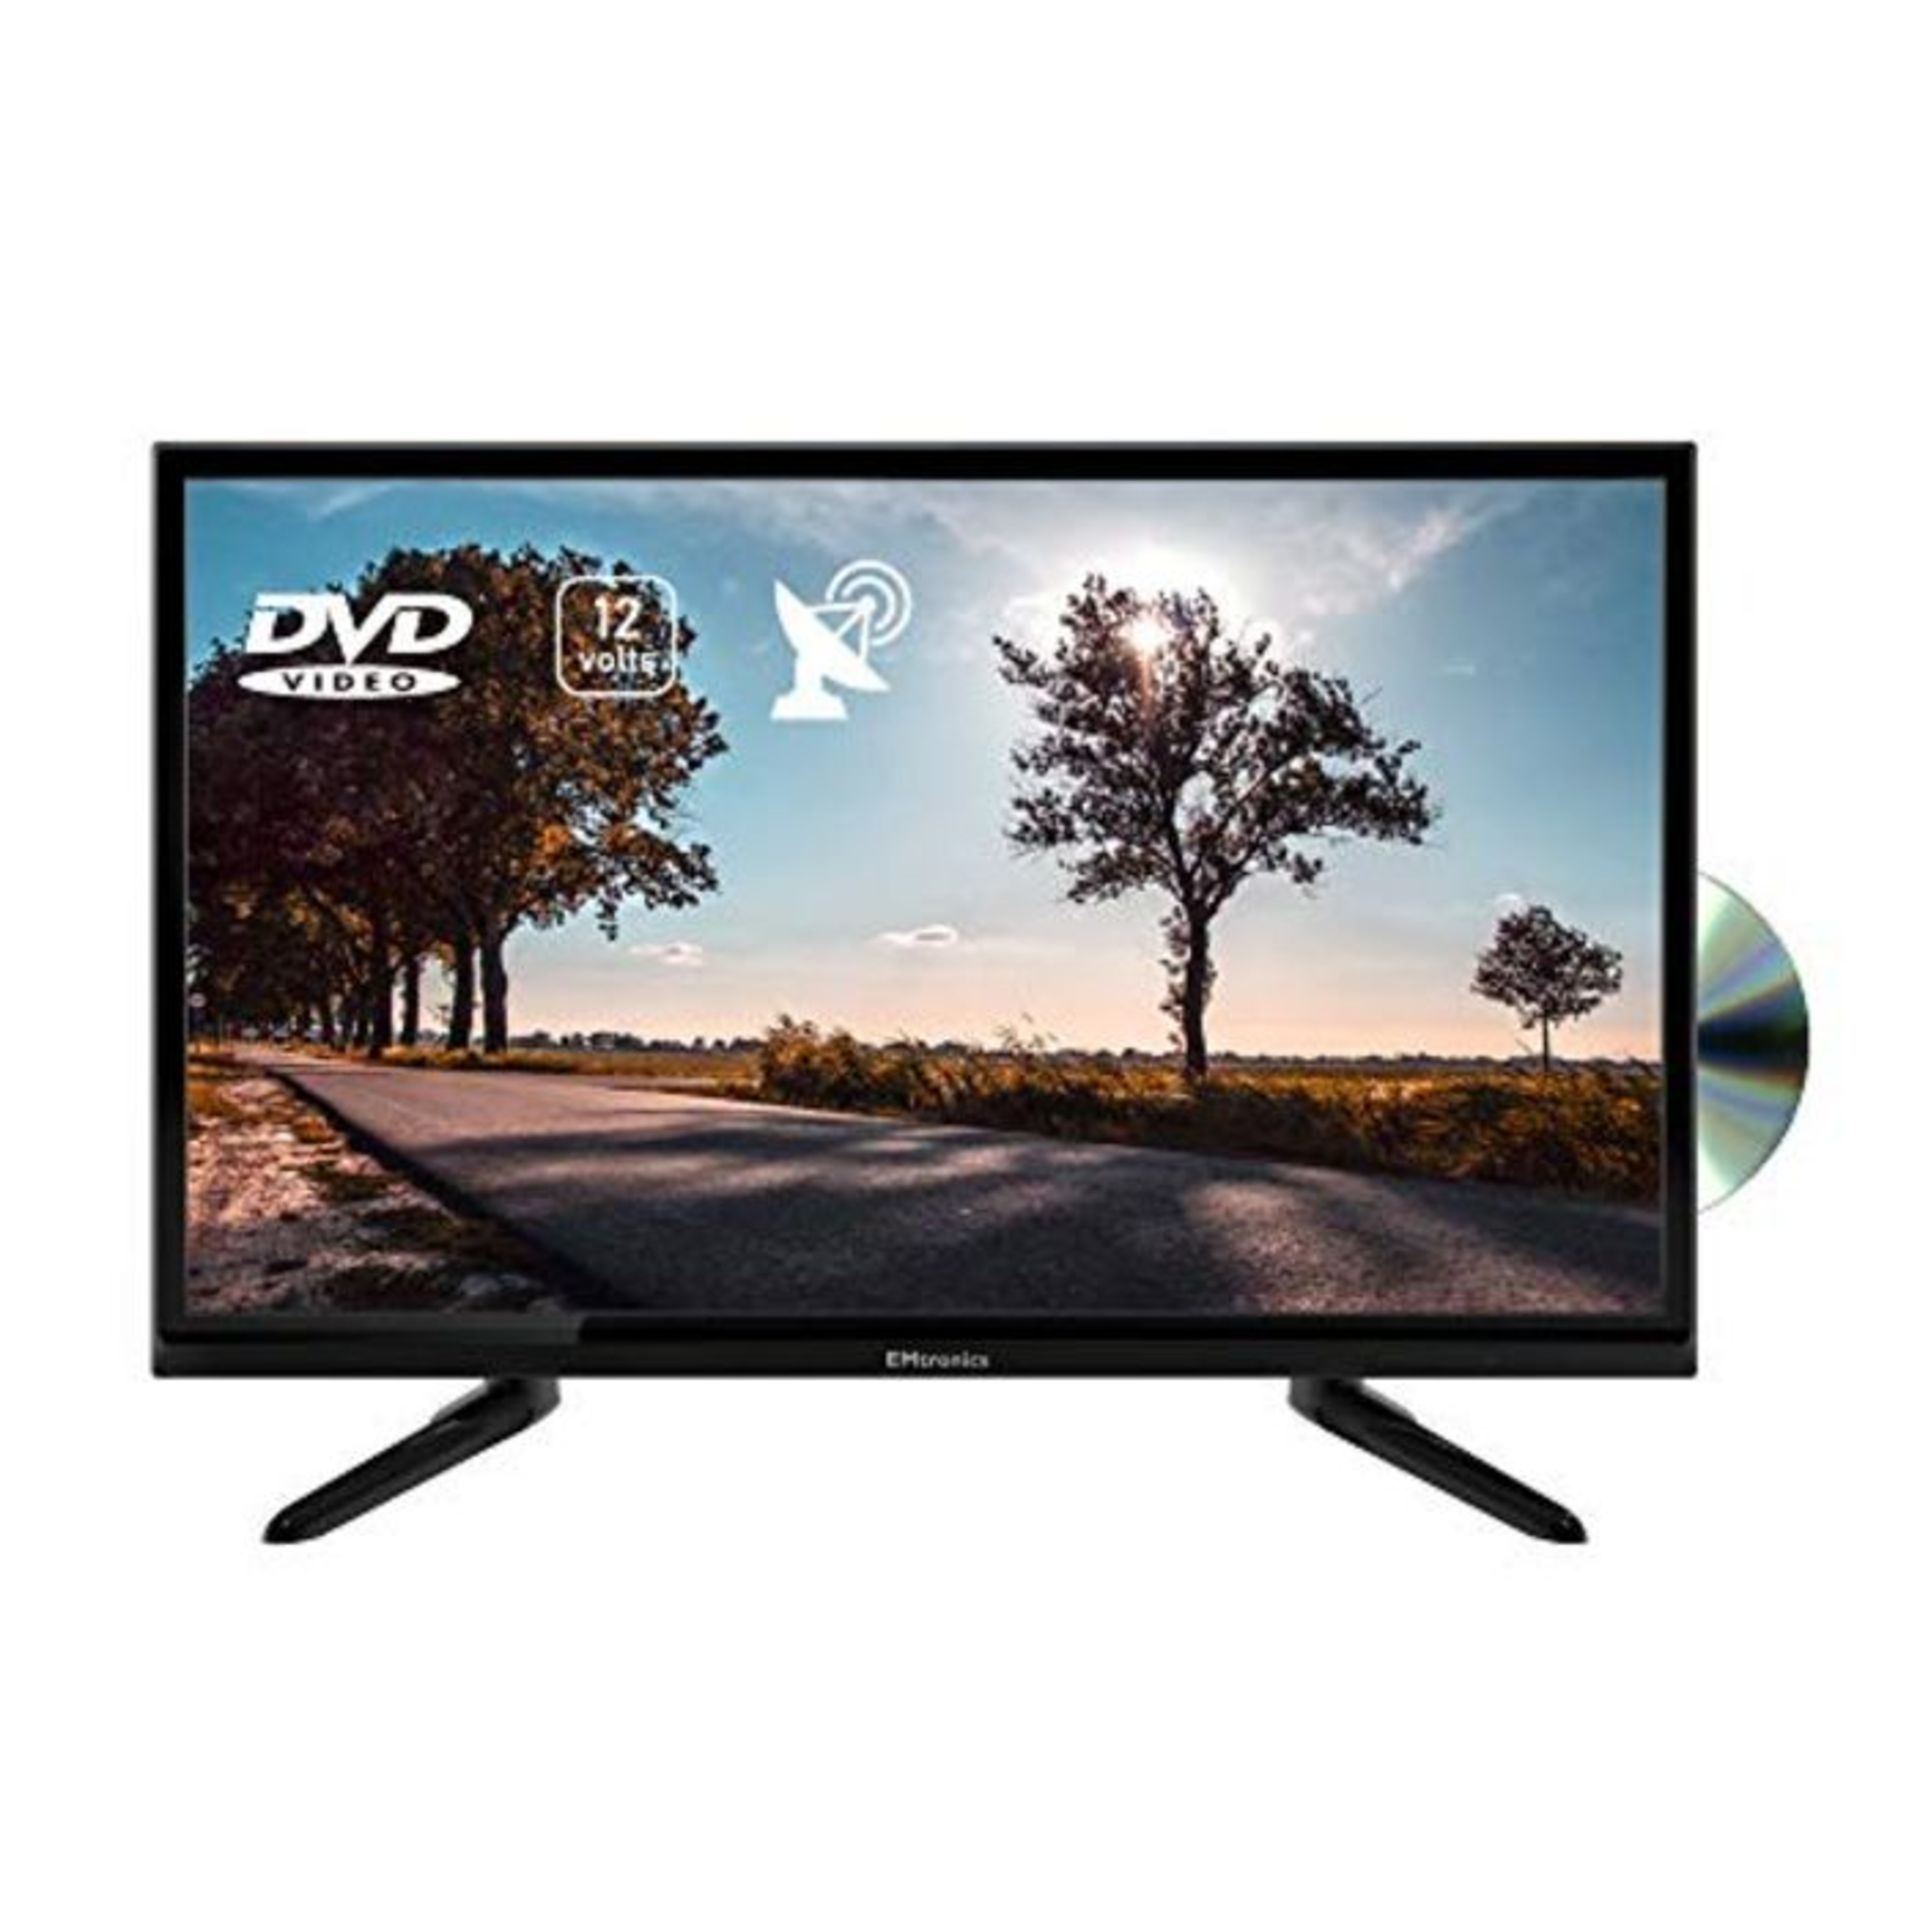 RRP £155.00 EMtronics 24" Inch 720p 12 Volt TV with DVD, HDMI, USB PVR and Satellite Tuner with 12